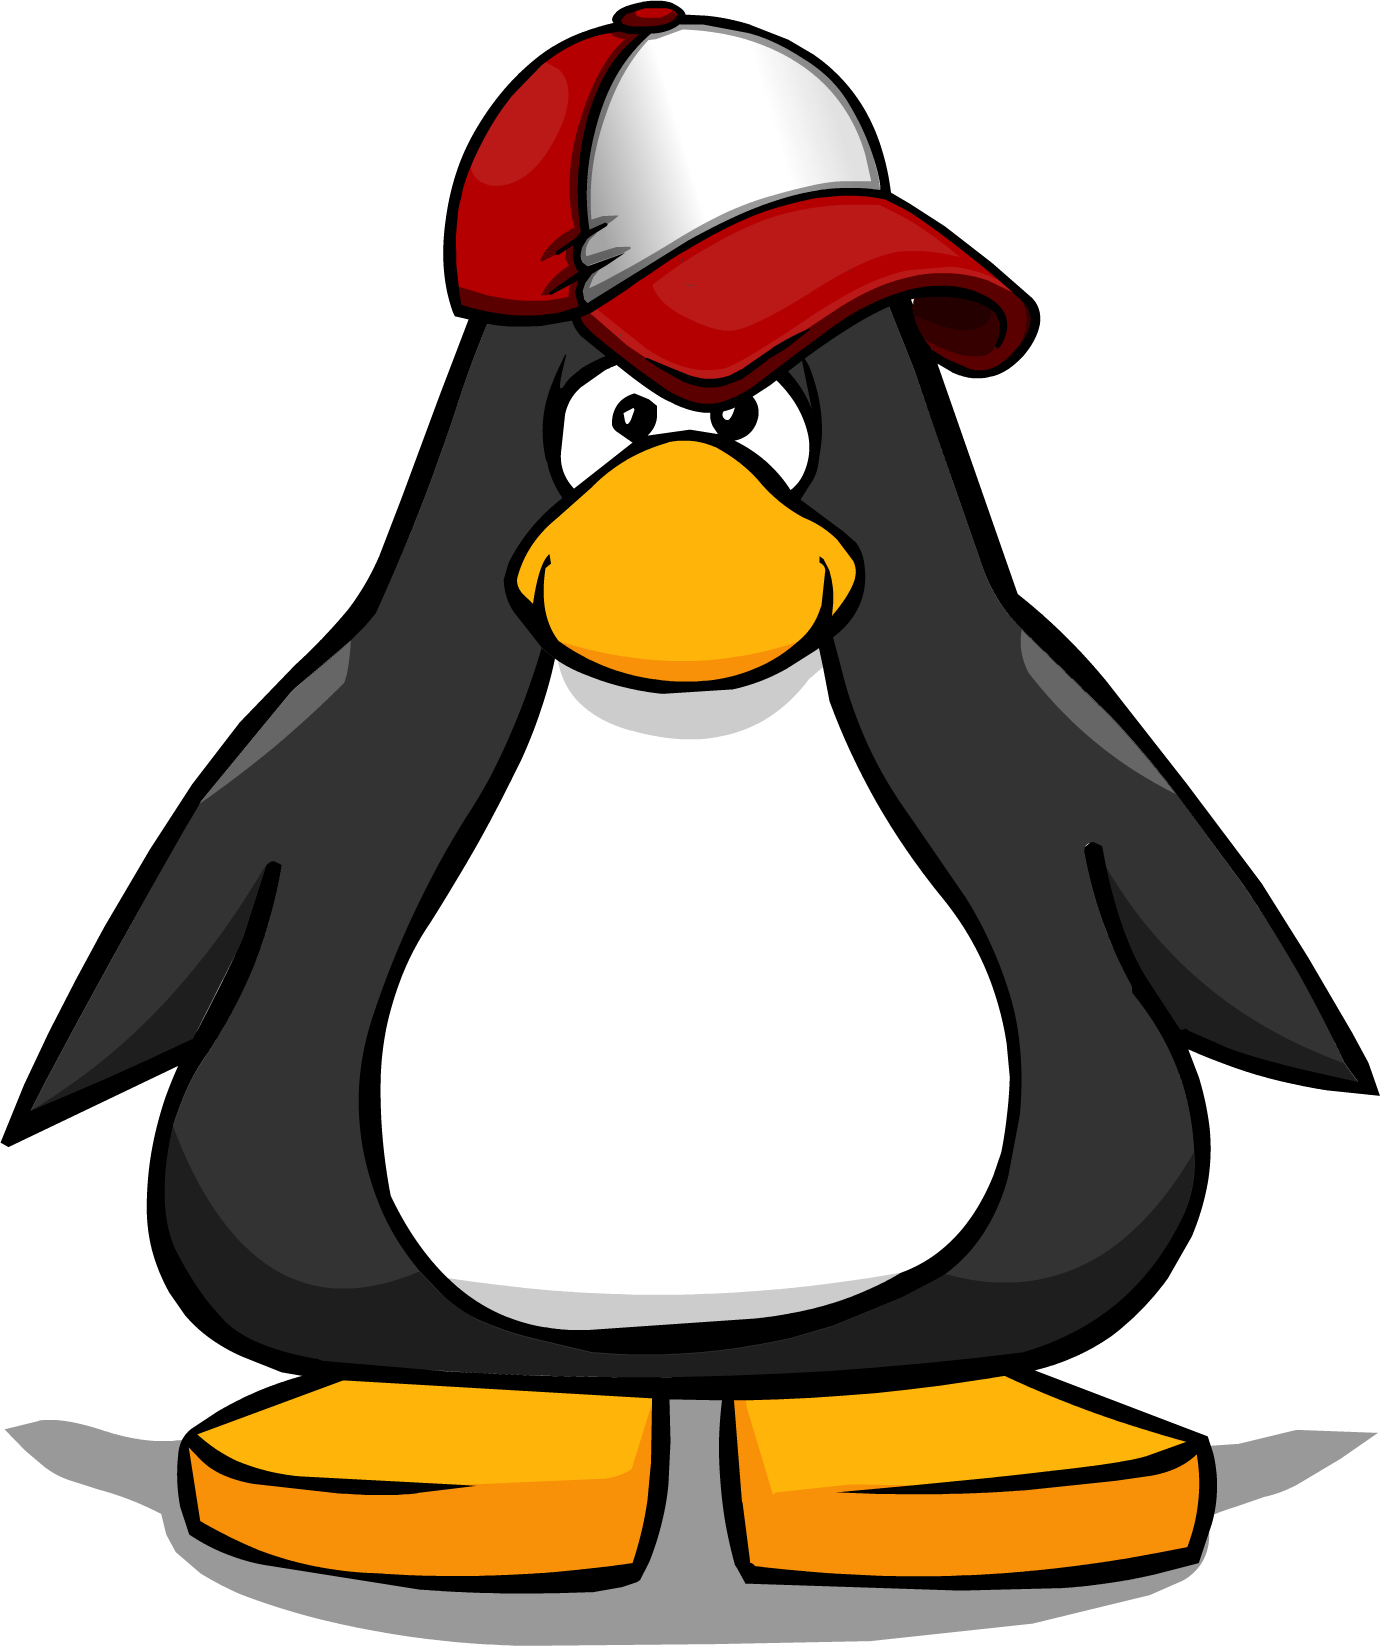 New Player Red Baseball Hat From A Player Card - Club Penguin With Hat (1380x1646)